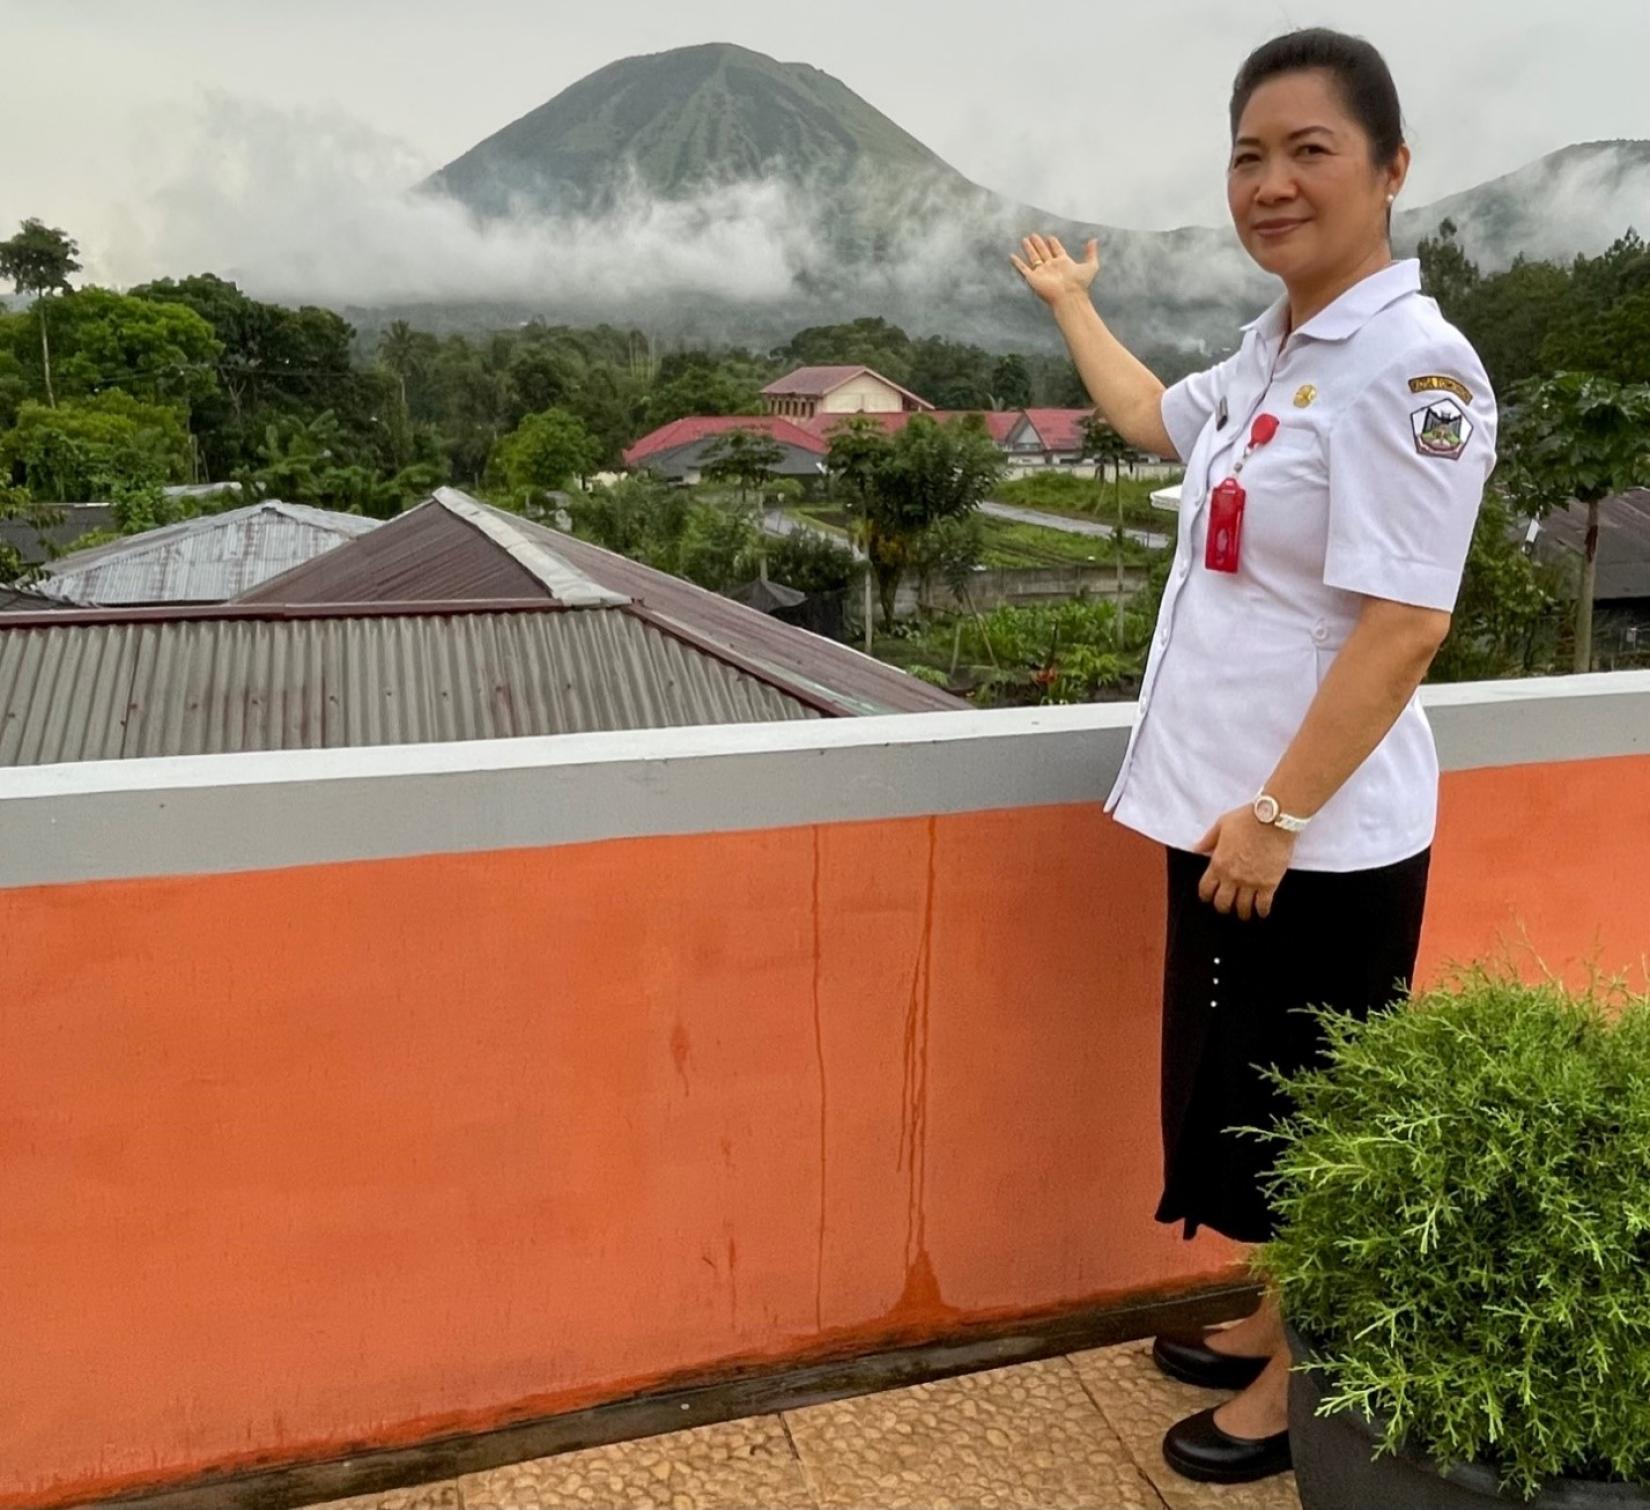 A woman wearing an official government uniform points out a volcanic Mountain Lokon from a rooftop.